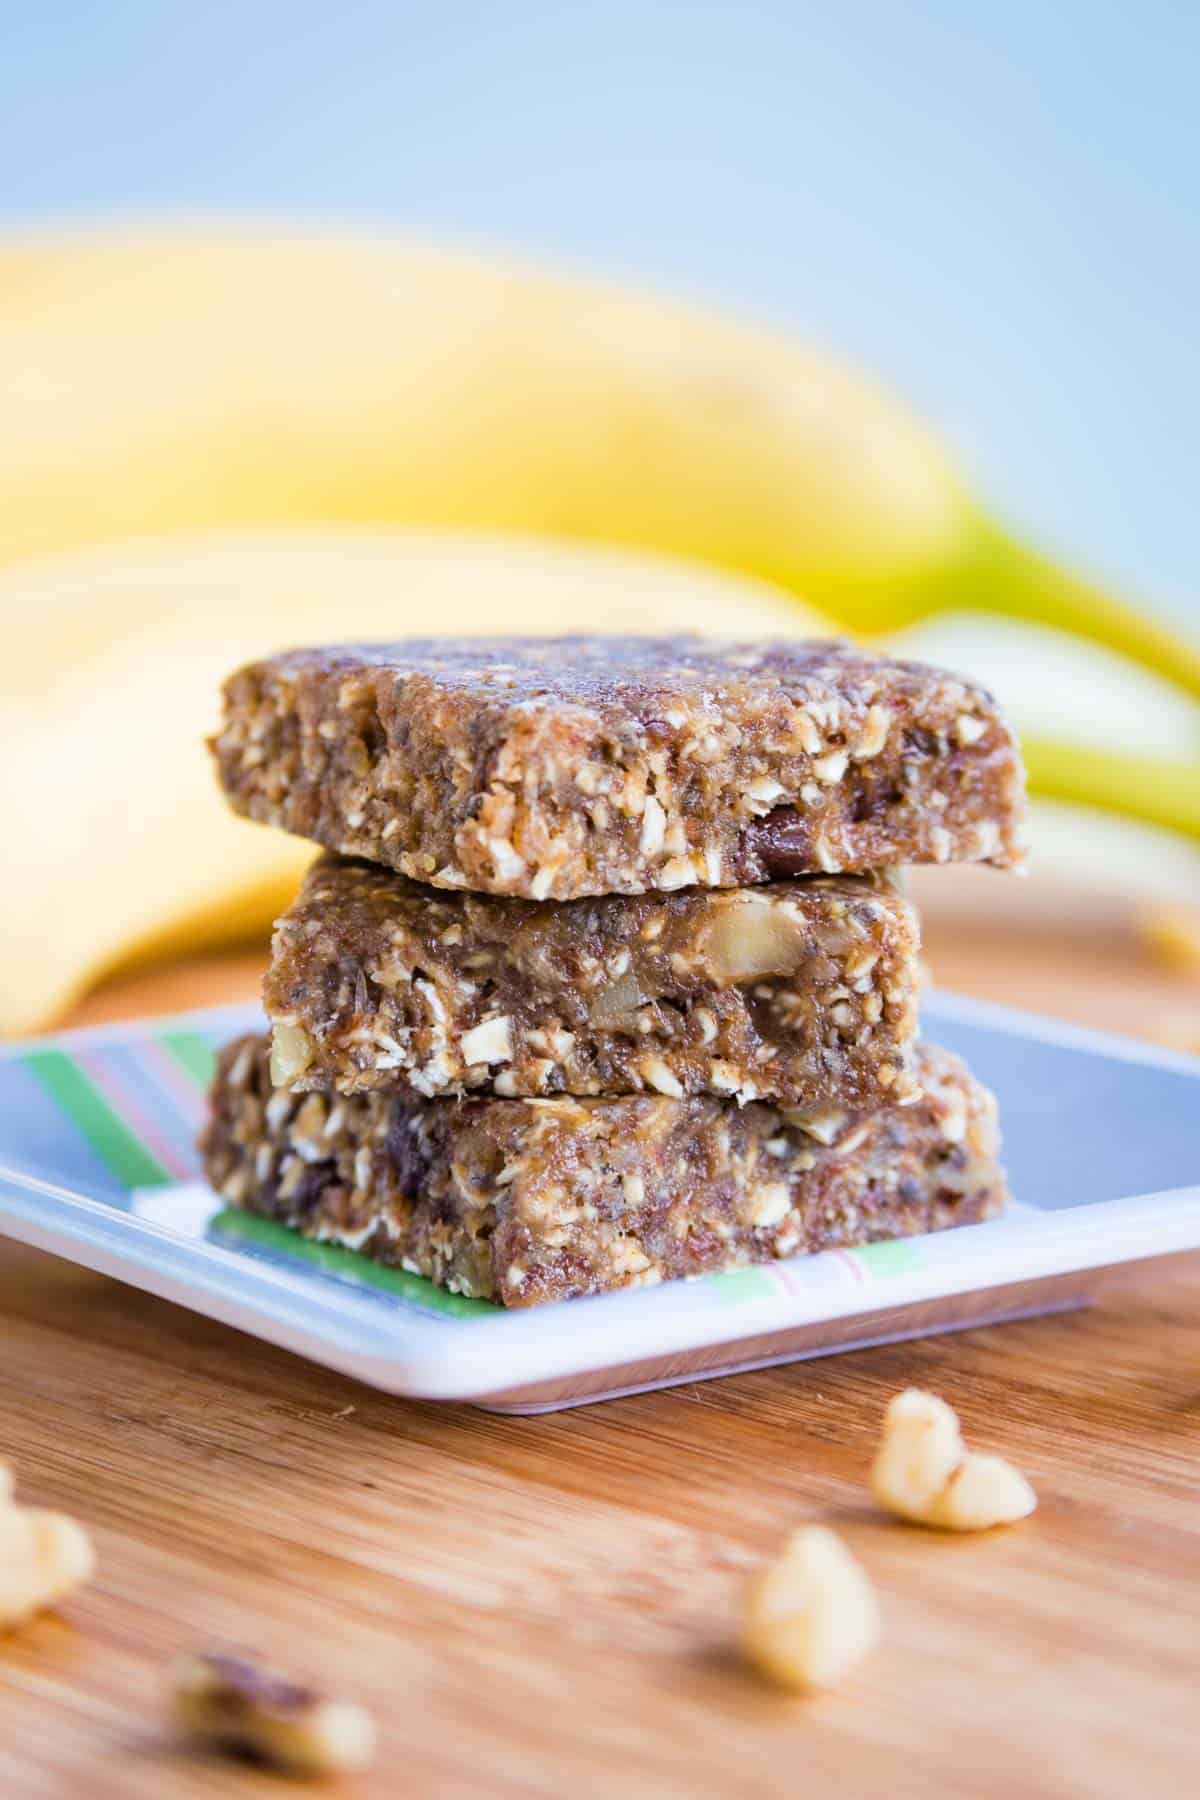 Three No-Bake Banana Bars in a stack on a small blue square plate on top of a wooden board.